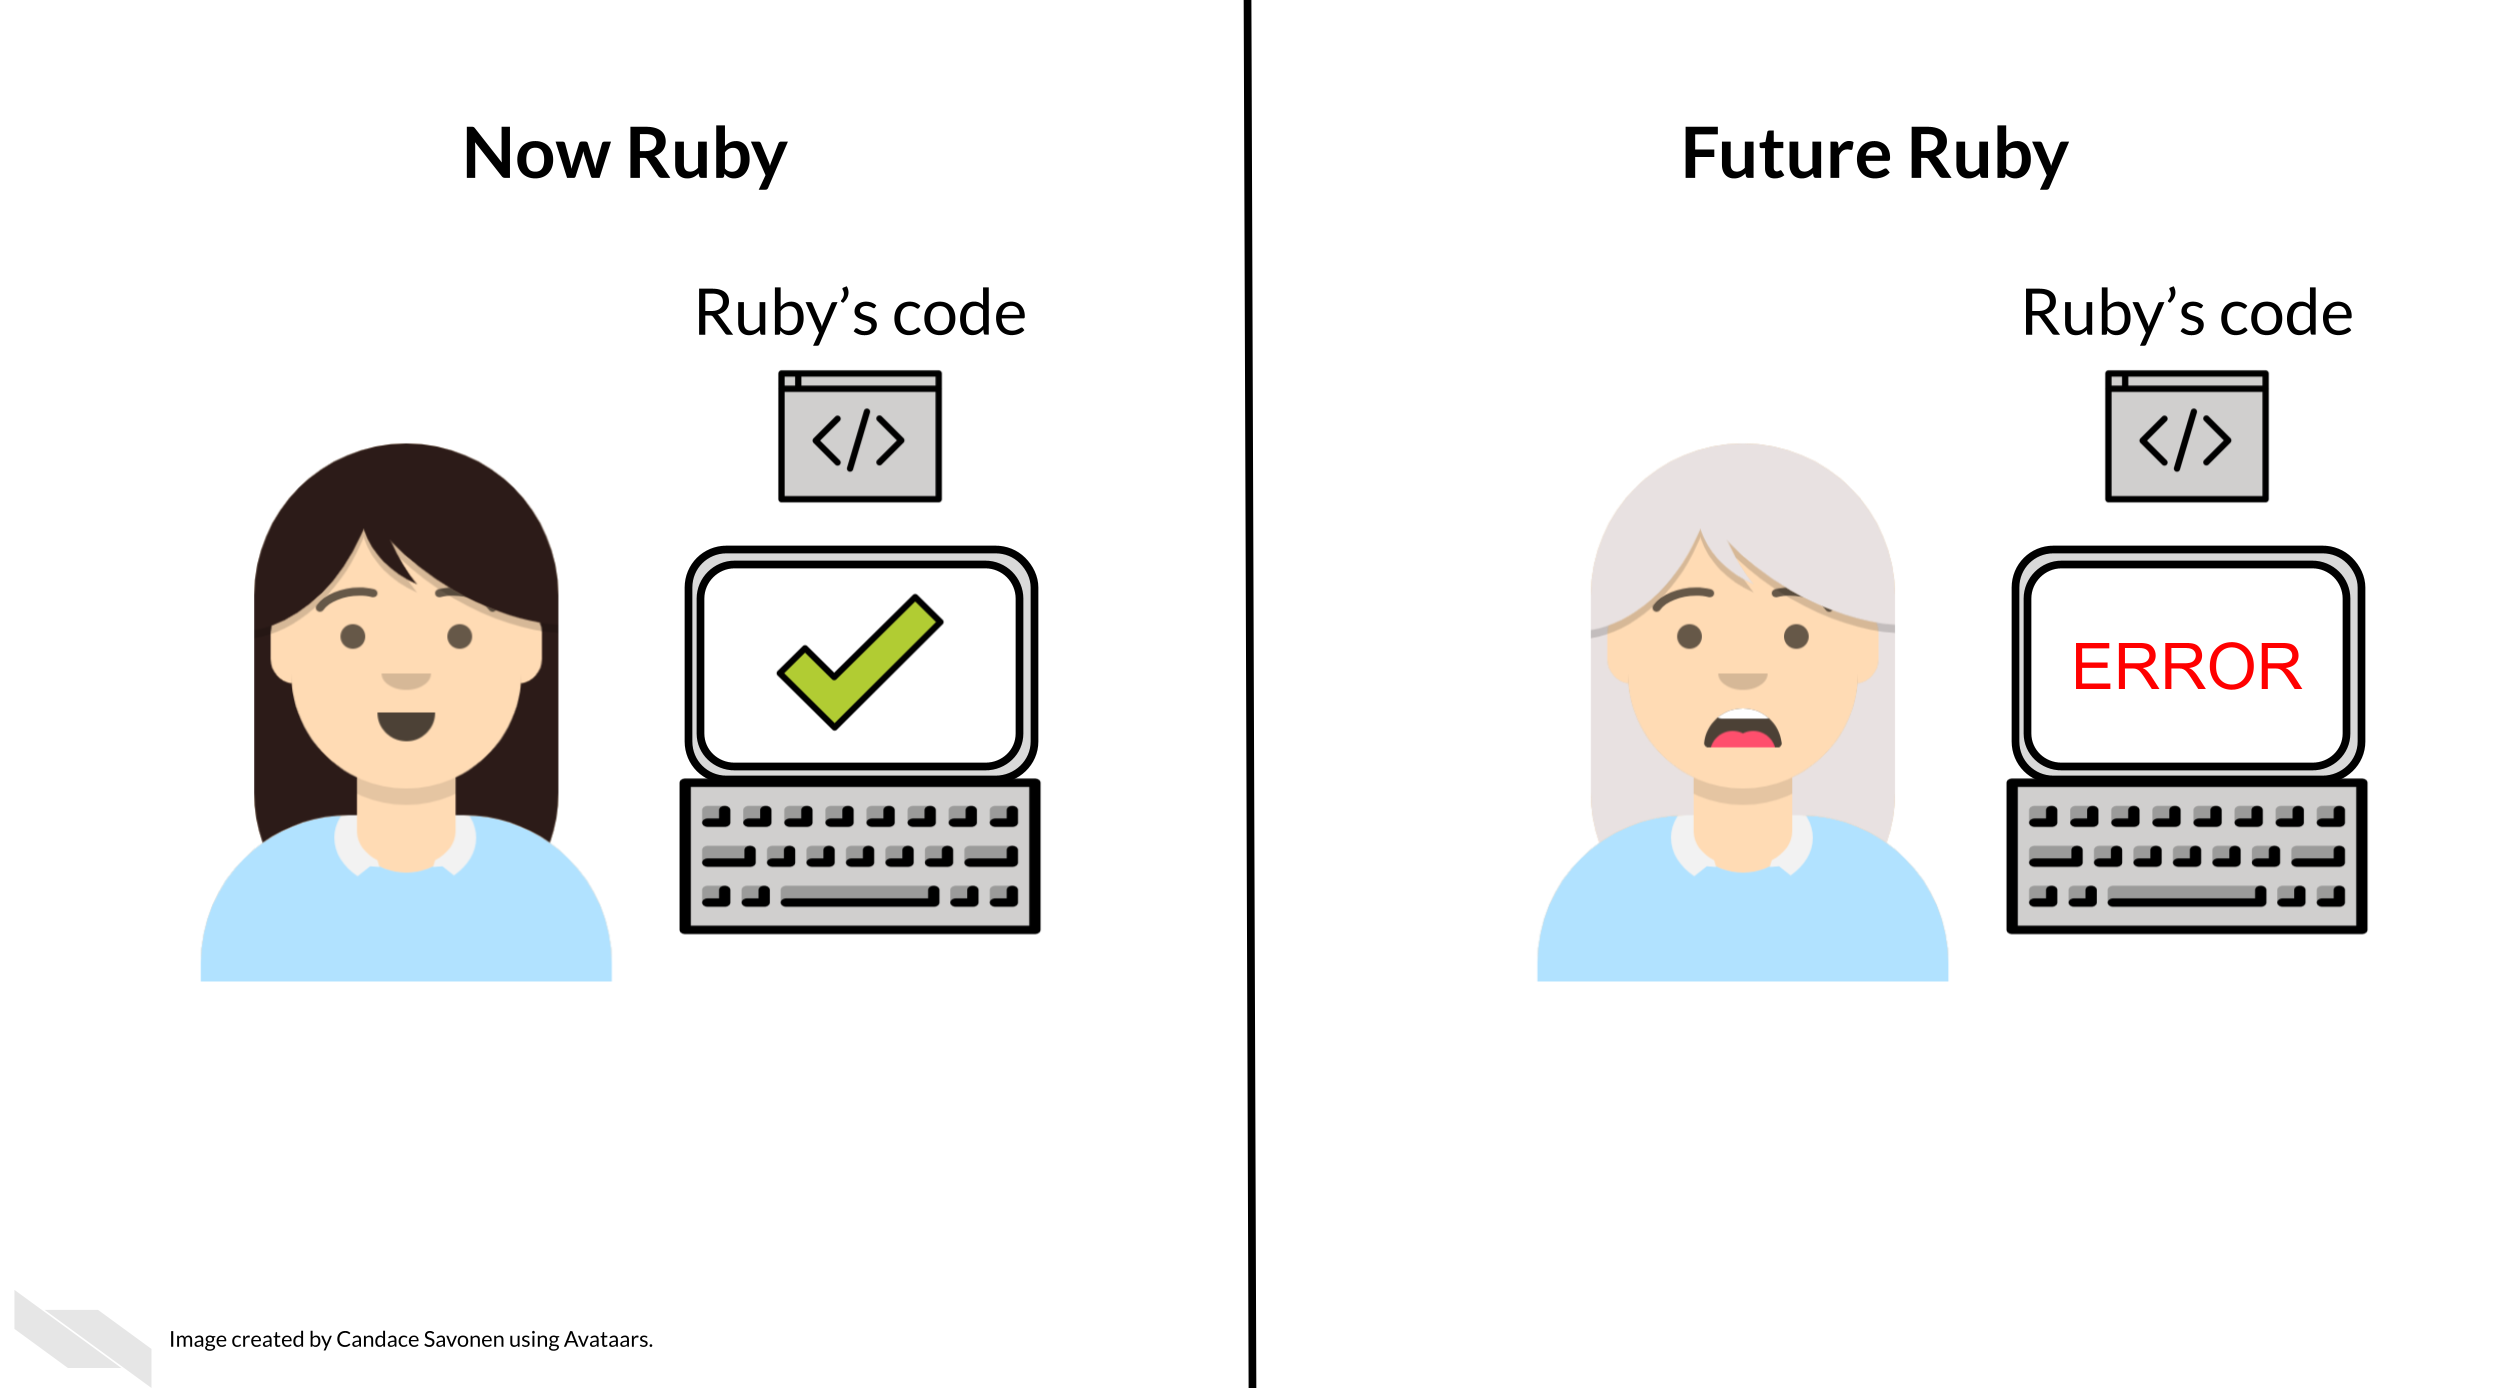 Ruby the researcher’s code works now as represented on her computer by a check mark. But Future Ruby, who has gray hair has an error running the same code!